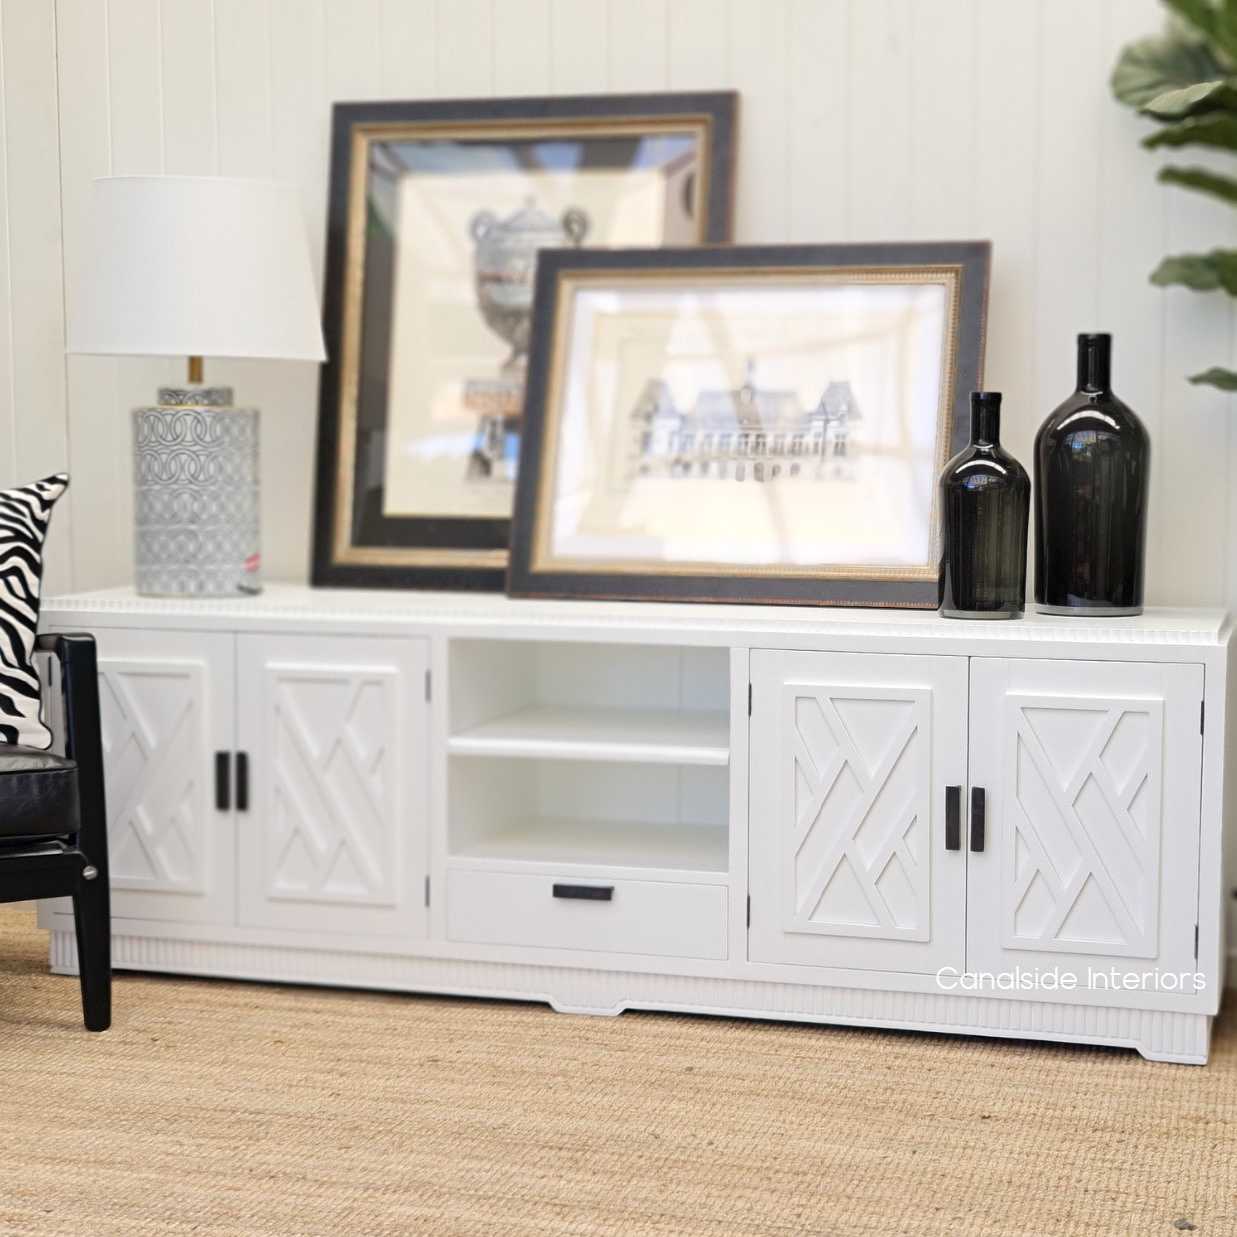 Ellery 4 Door TV Unit Sideboard White  HAMPTONS Style, PLANTATION Style, LIVING Room, LIVING TV Media & Storage, TABLES Sideboards & Buffets, STORAGE, STORAGE Sideboards & Buffets, PLANTATION STYLE Media Unit hollywood regency hollywood glam chinoiserie